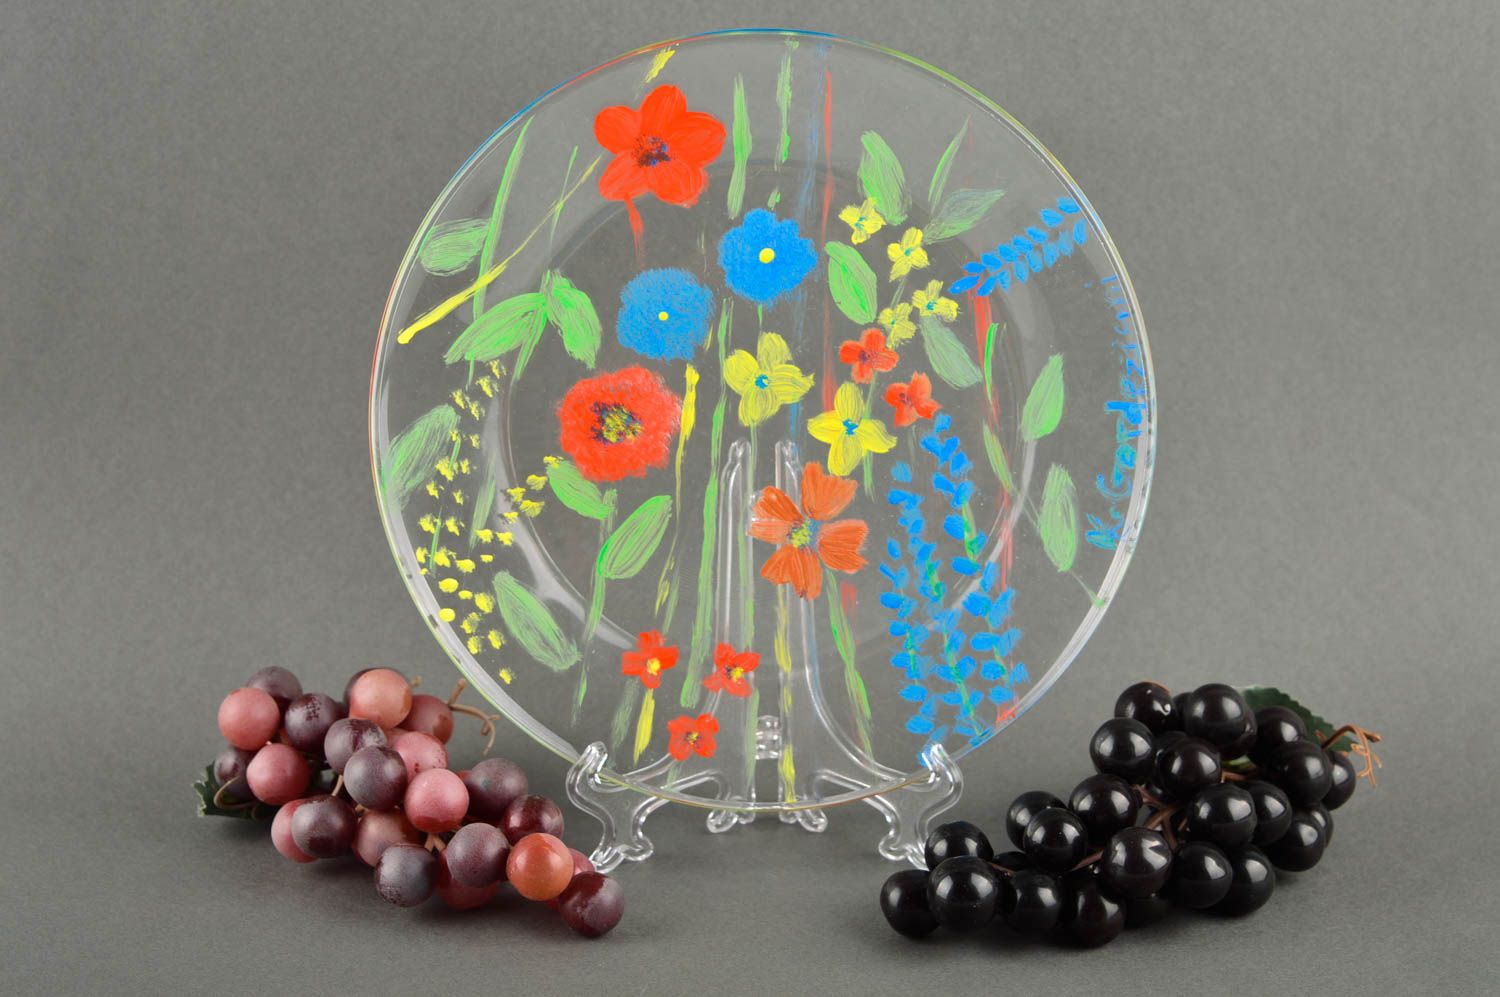 Handmade glass plate design decorative plates cool rooms decorative use only photo 1